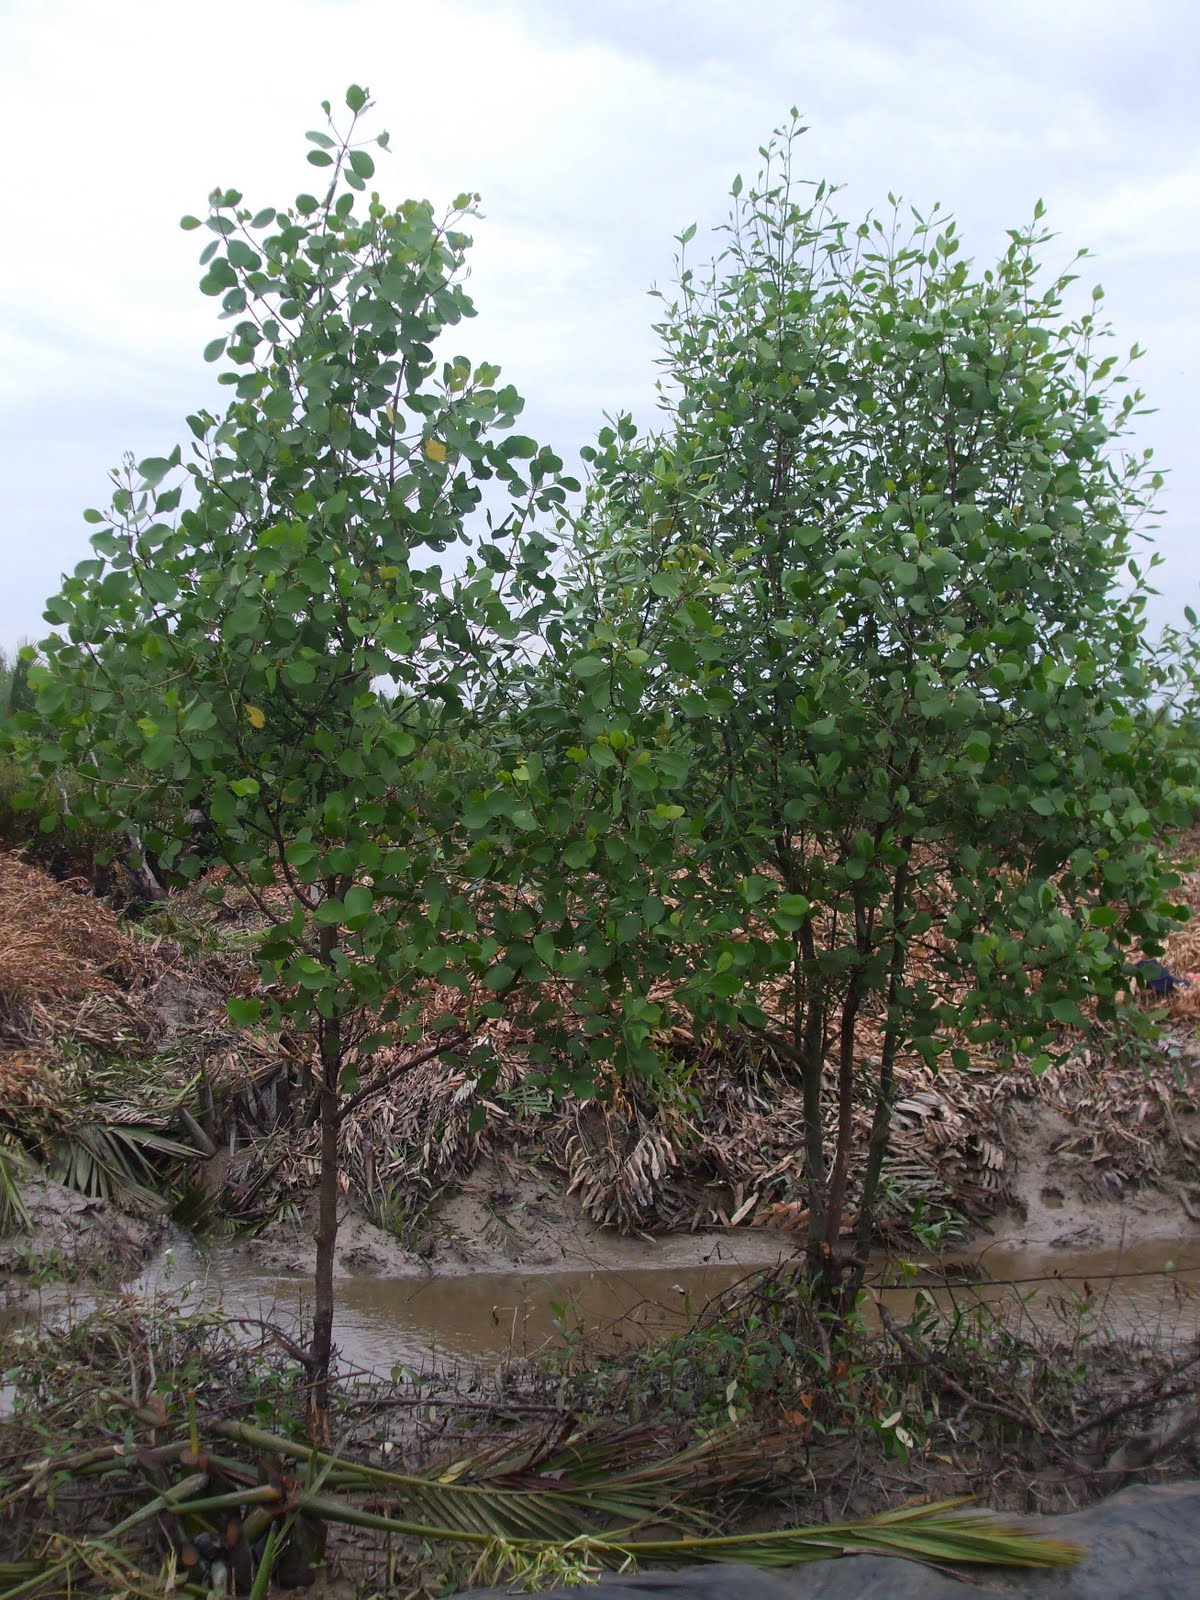 Plants Pidada Sonneratia is a kind of swamp dwellers tree by the river and part of the mangrove ve ation Locally this tree is often referred to as